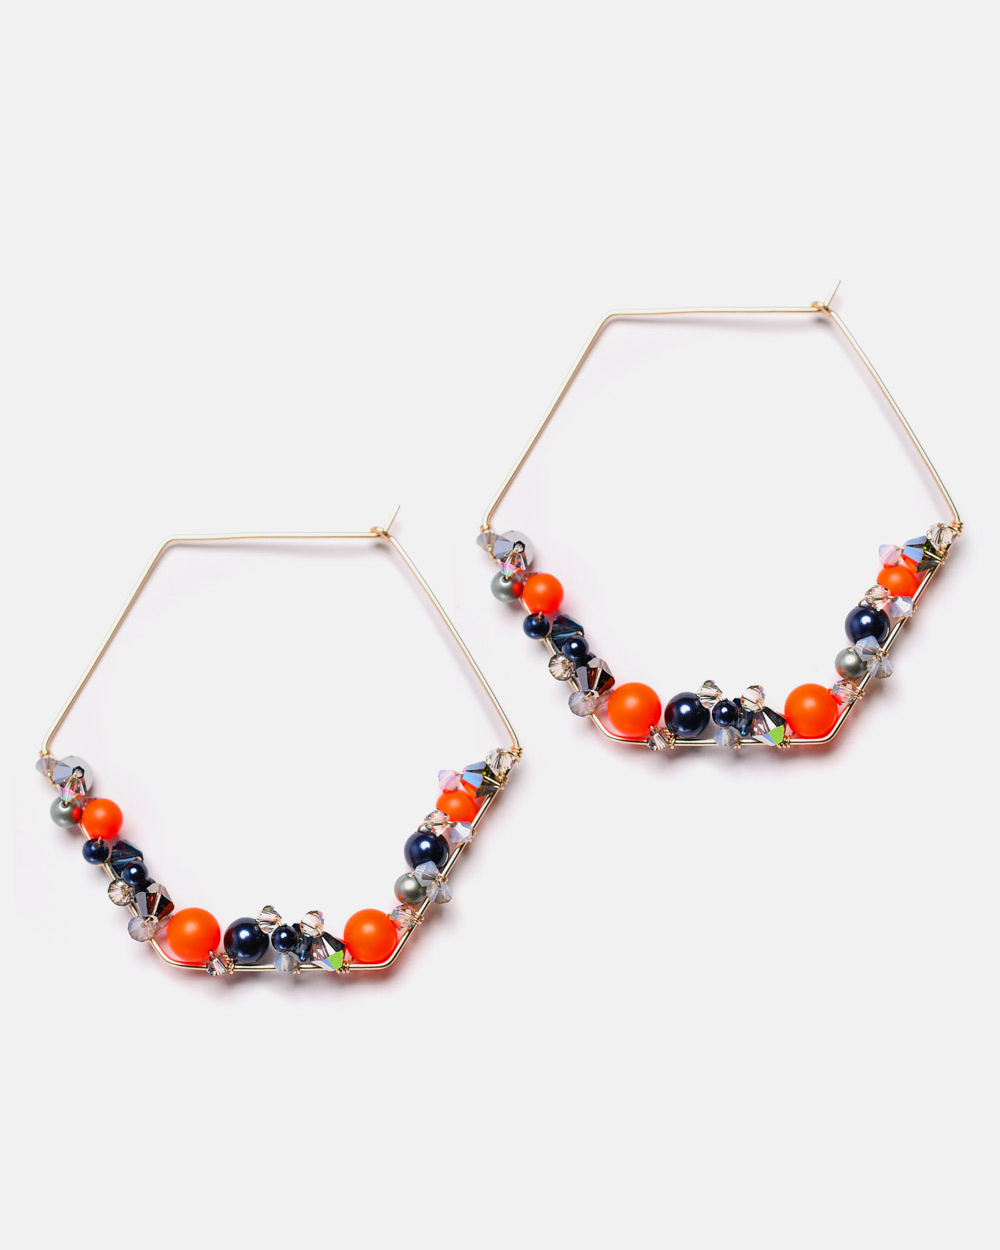 Endlessly wearable, these hexagon pieces are an original interpretation of a modern hoop earrings. Handcrafted in 14K gold-filled featuring neon orange pearls and colorful crystals.